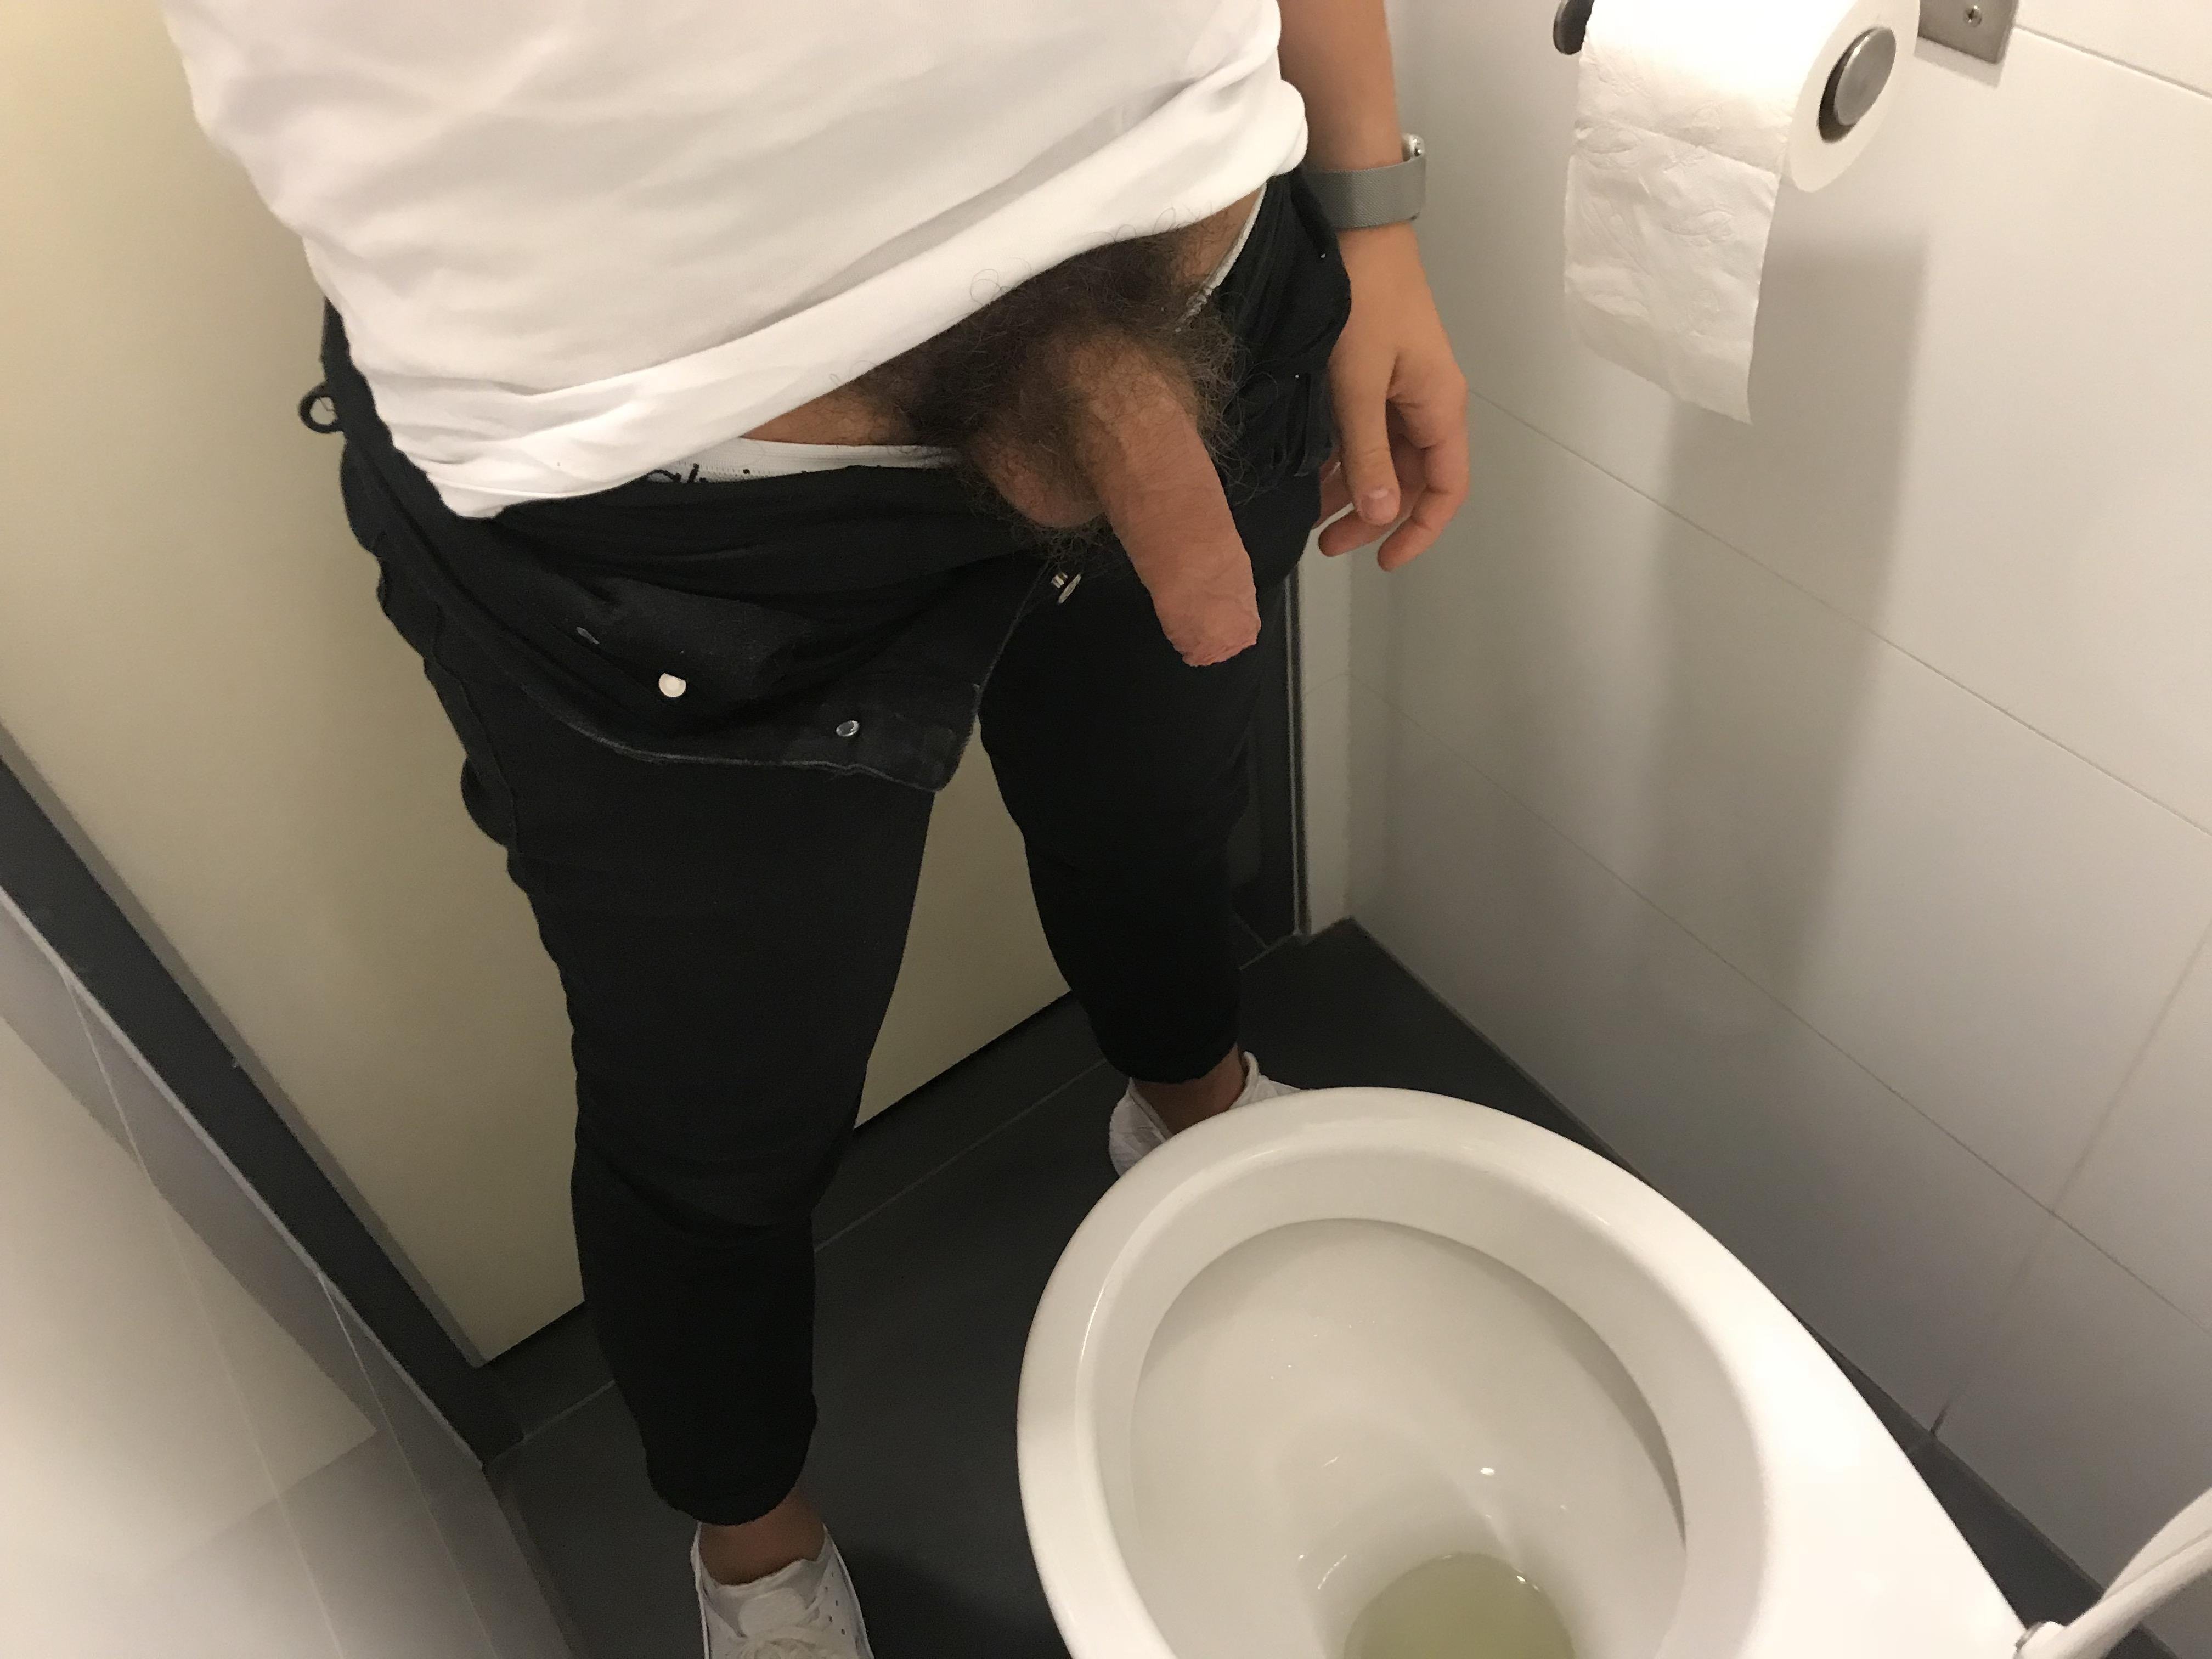 At work, who wants my fresh piss and cum?